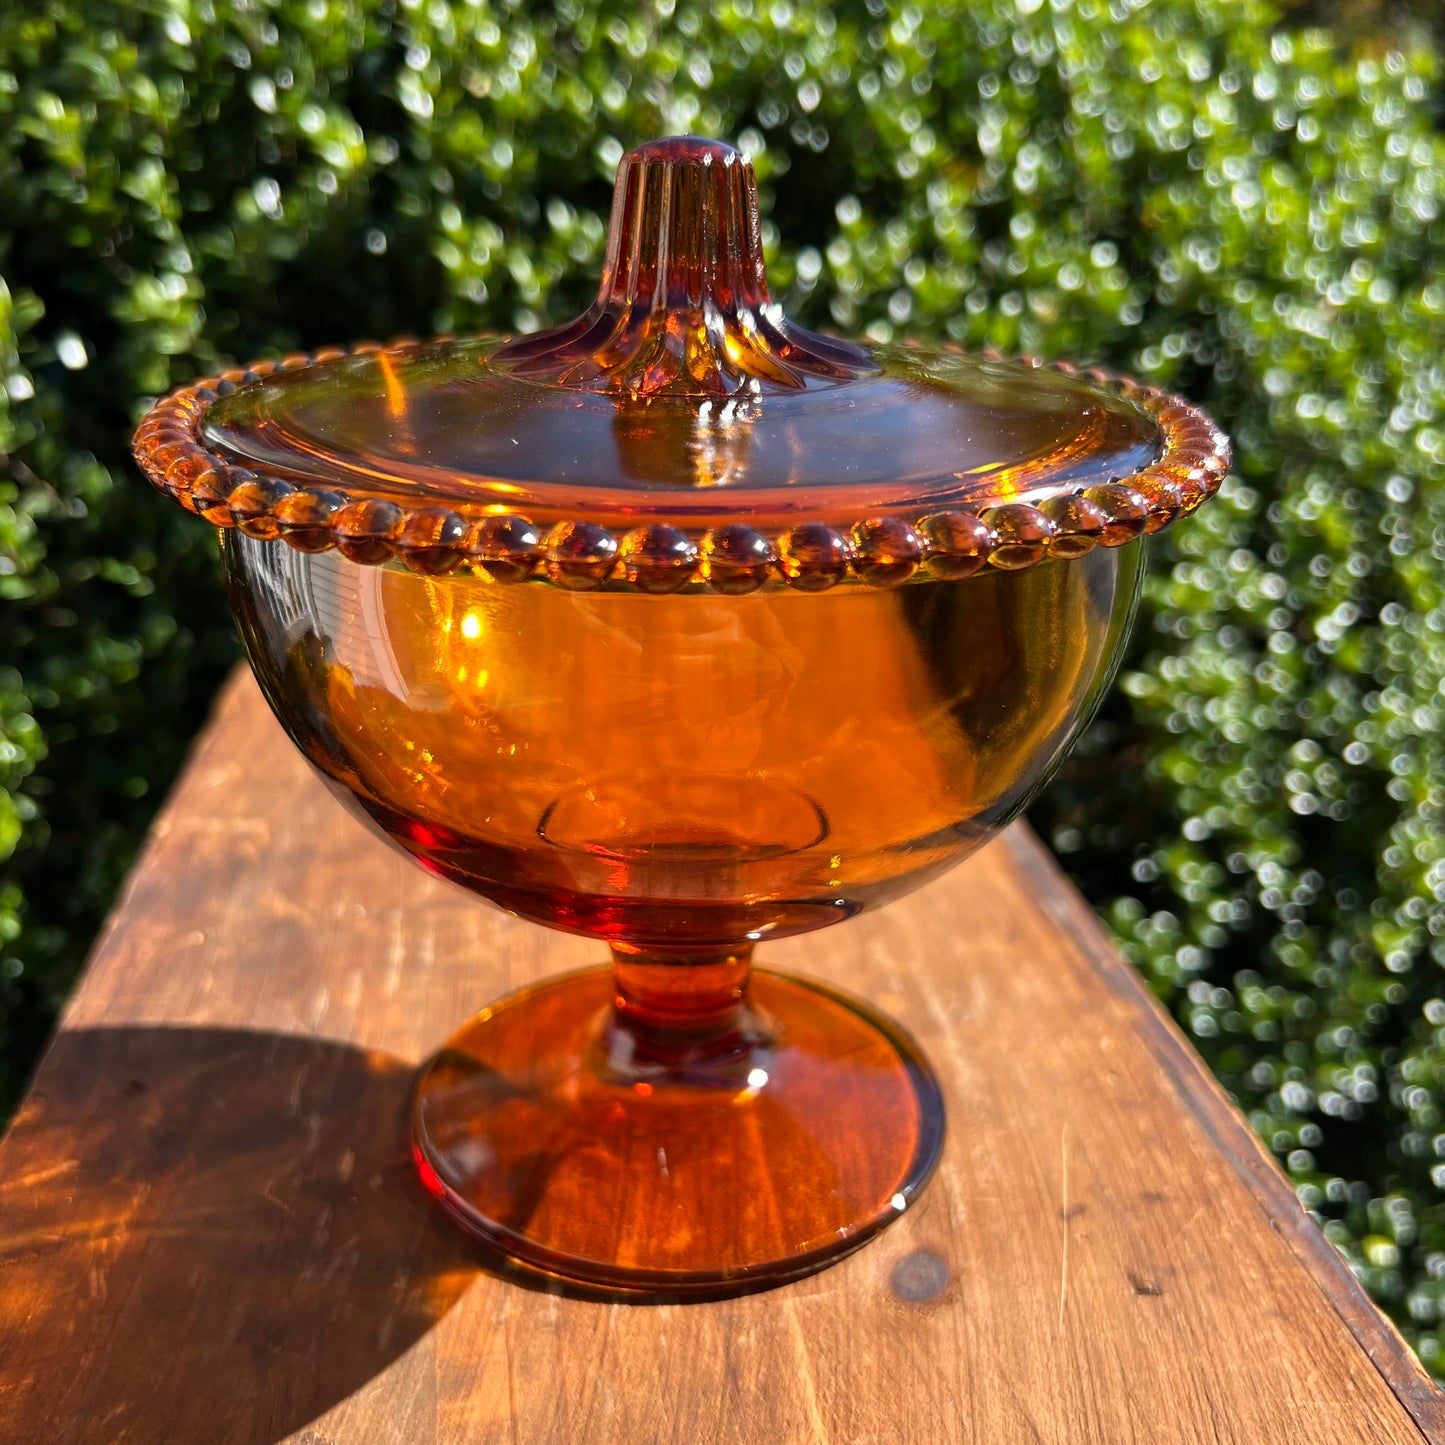 Amber Hued Depression Glass Candy Dish Beaded Edge by Indiana Glass Co.